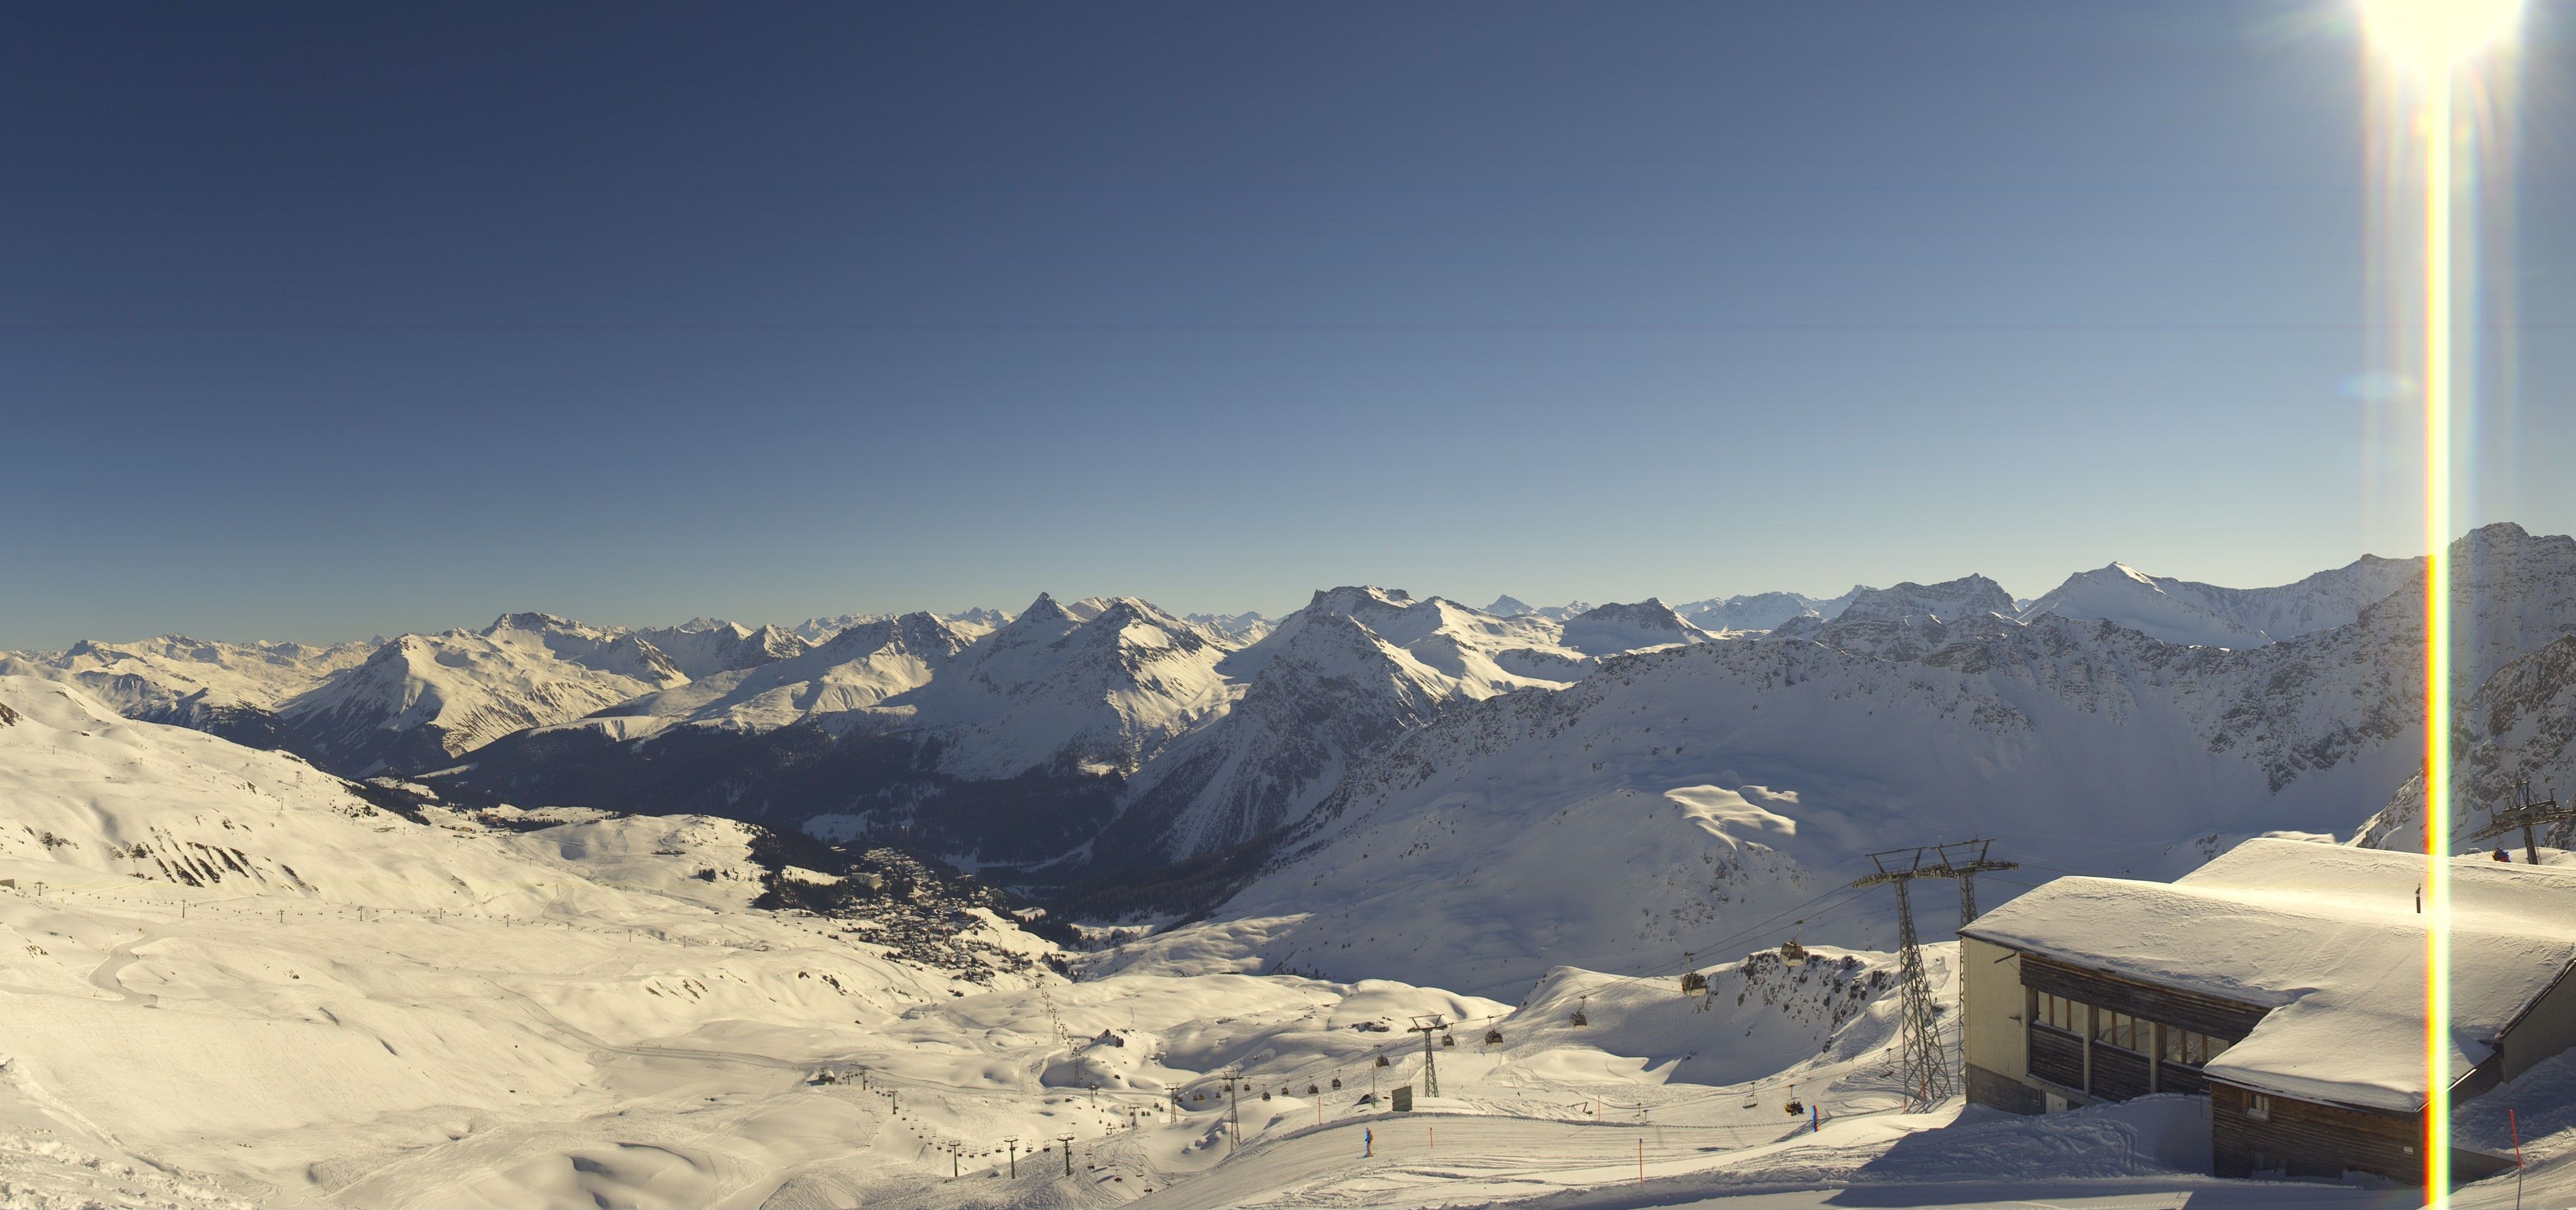 Another sunny day in Arosa (roundshot.com)